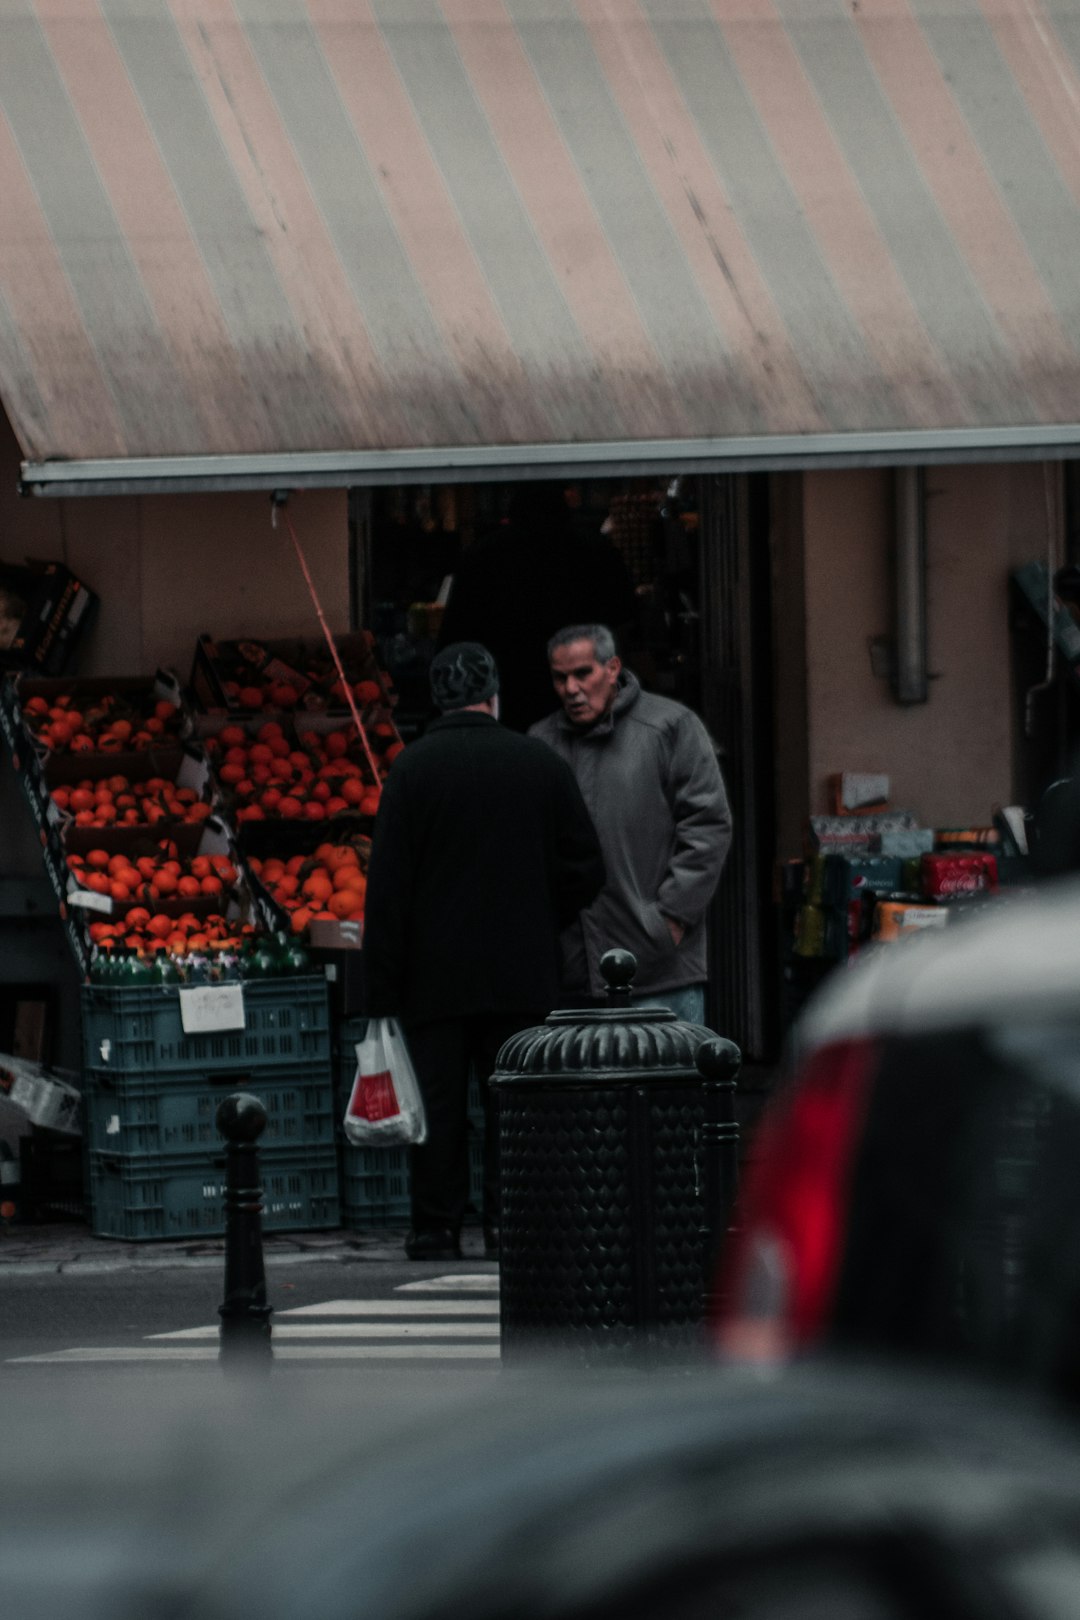 man in black jacket standing near fruit stand during daytime